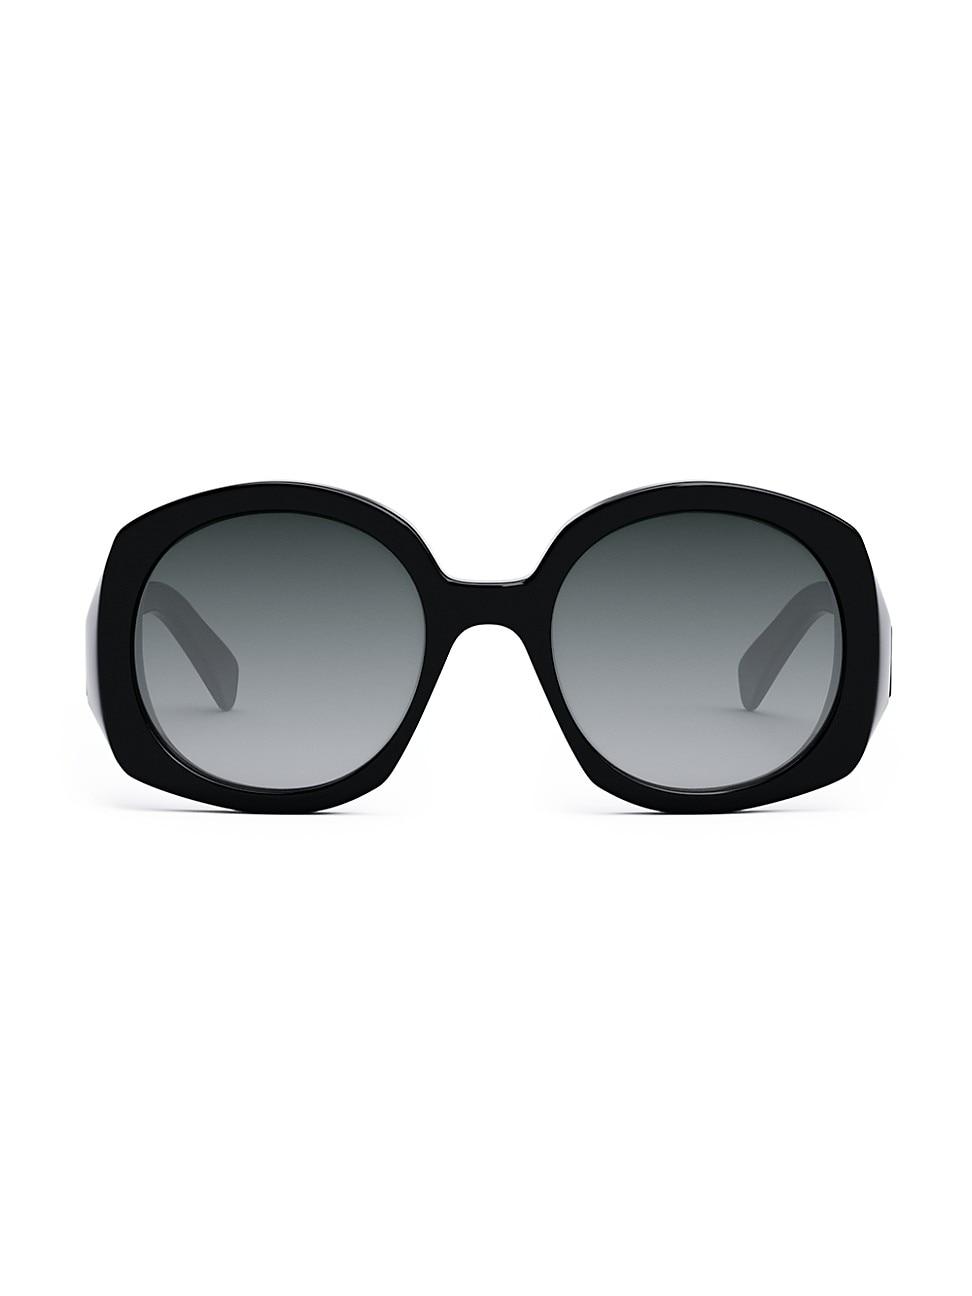 Celine Bold 3 Dots 53mm Round Sunglasses in Black | Lyst